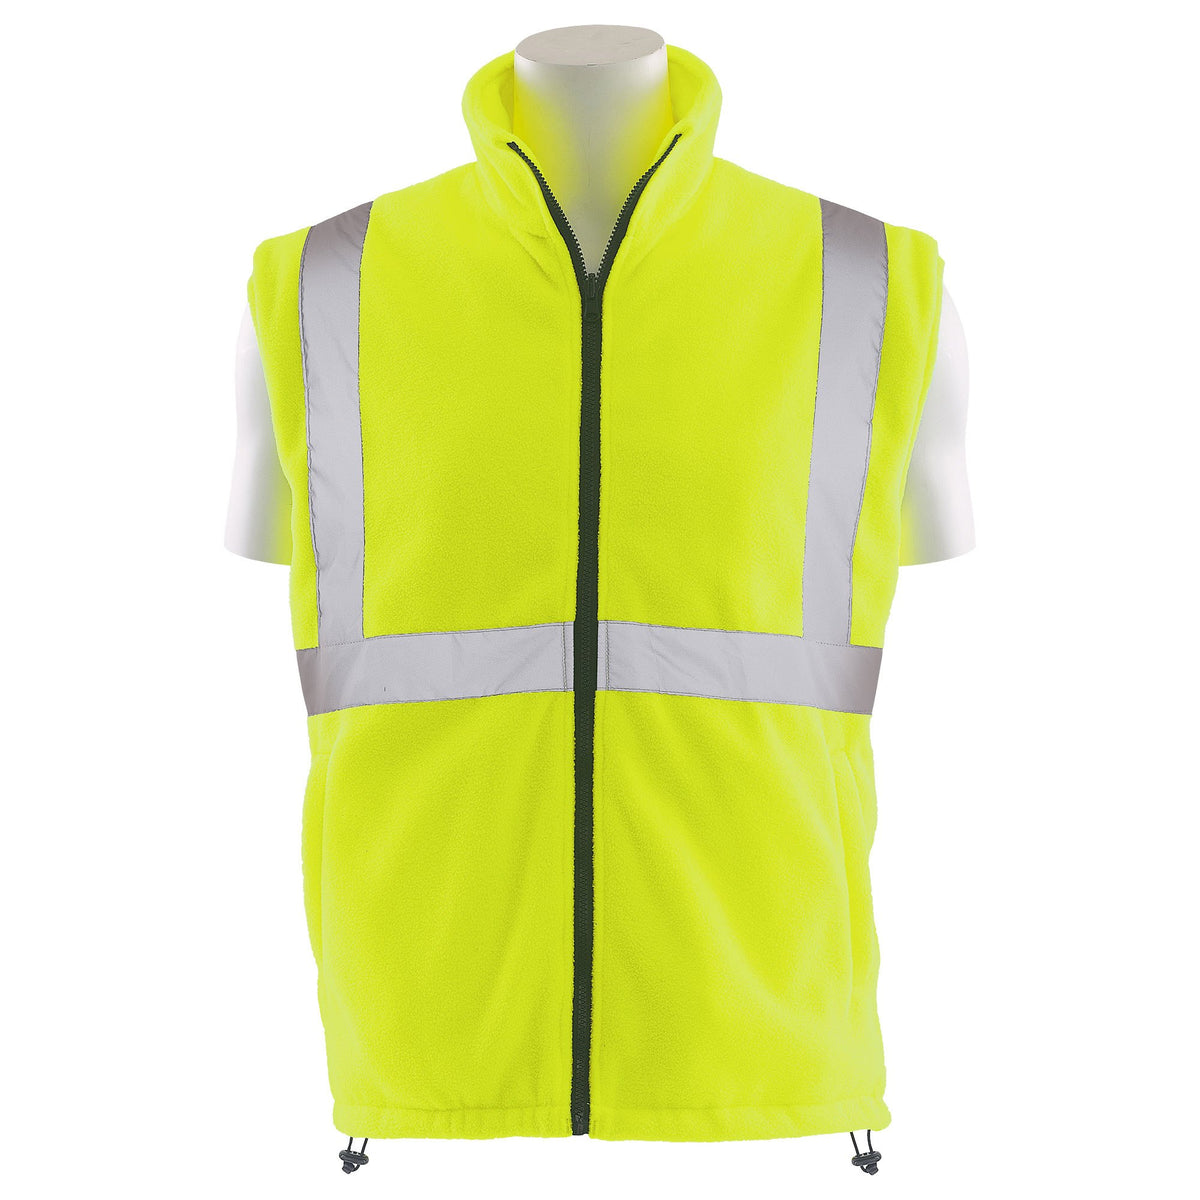 W570R Class 3 Ripstop Jacket with Removable Inner Vest